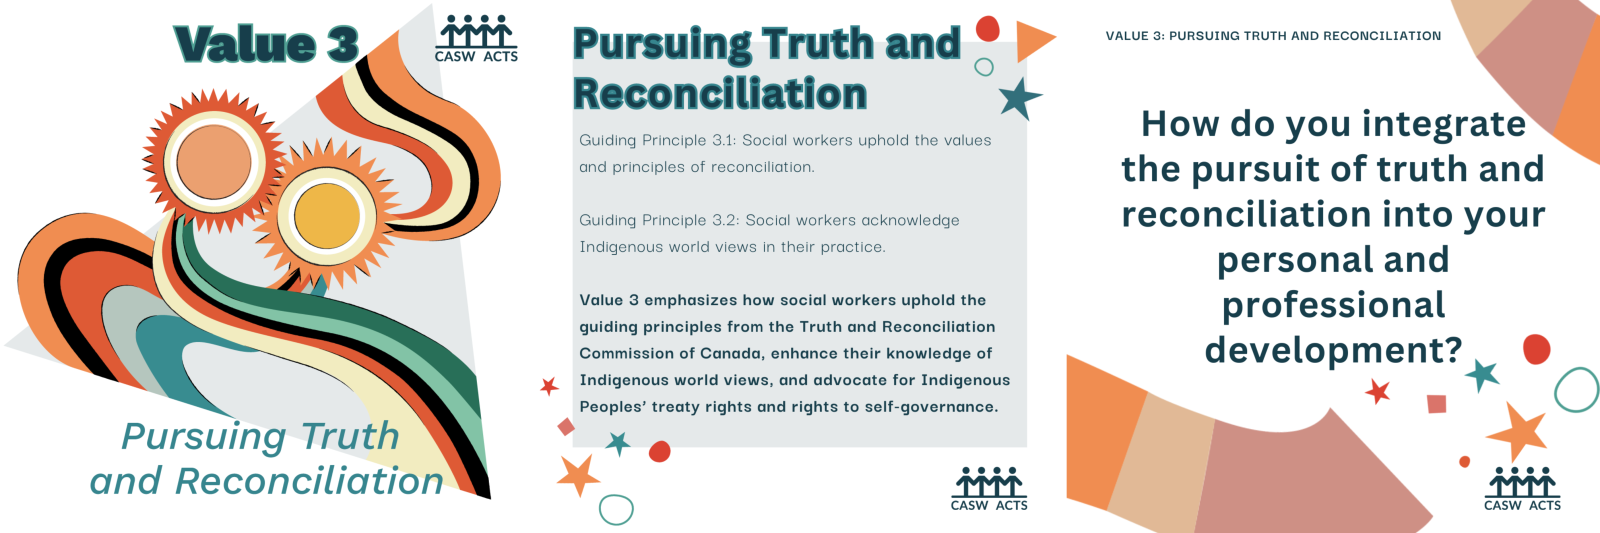 Value 3: Pursuing Truth and Reconciliation